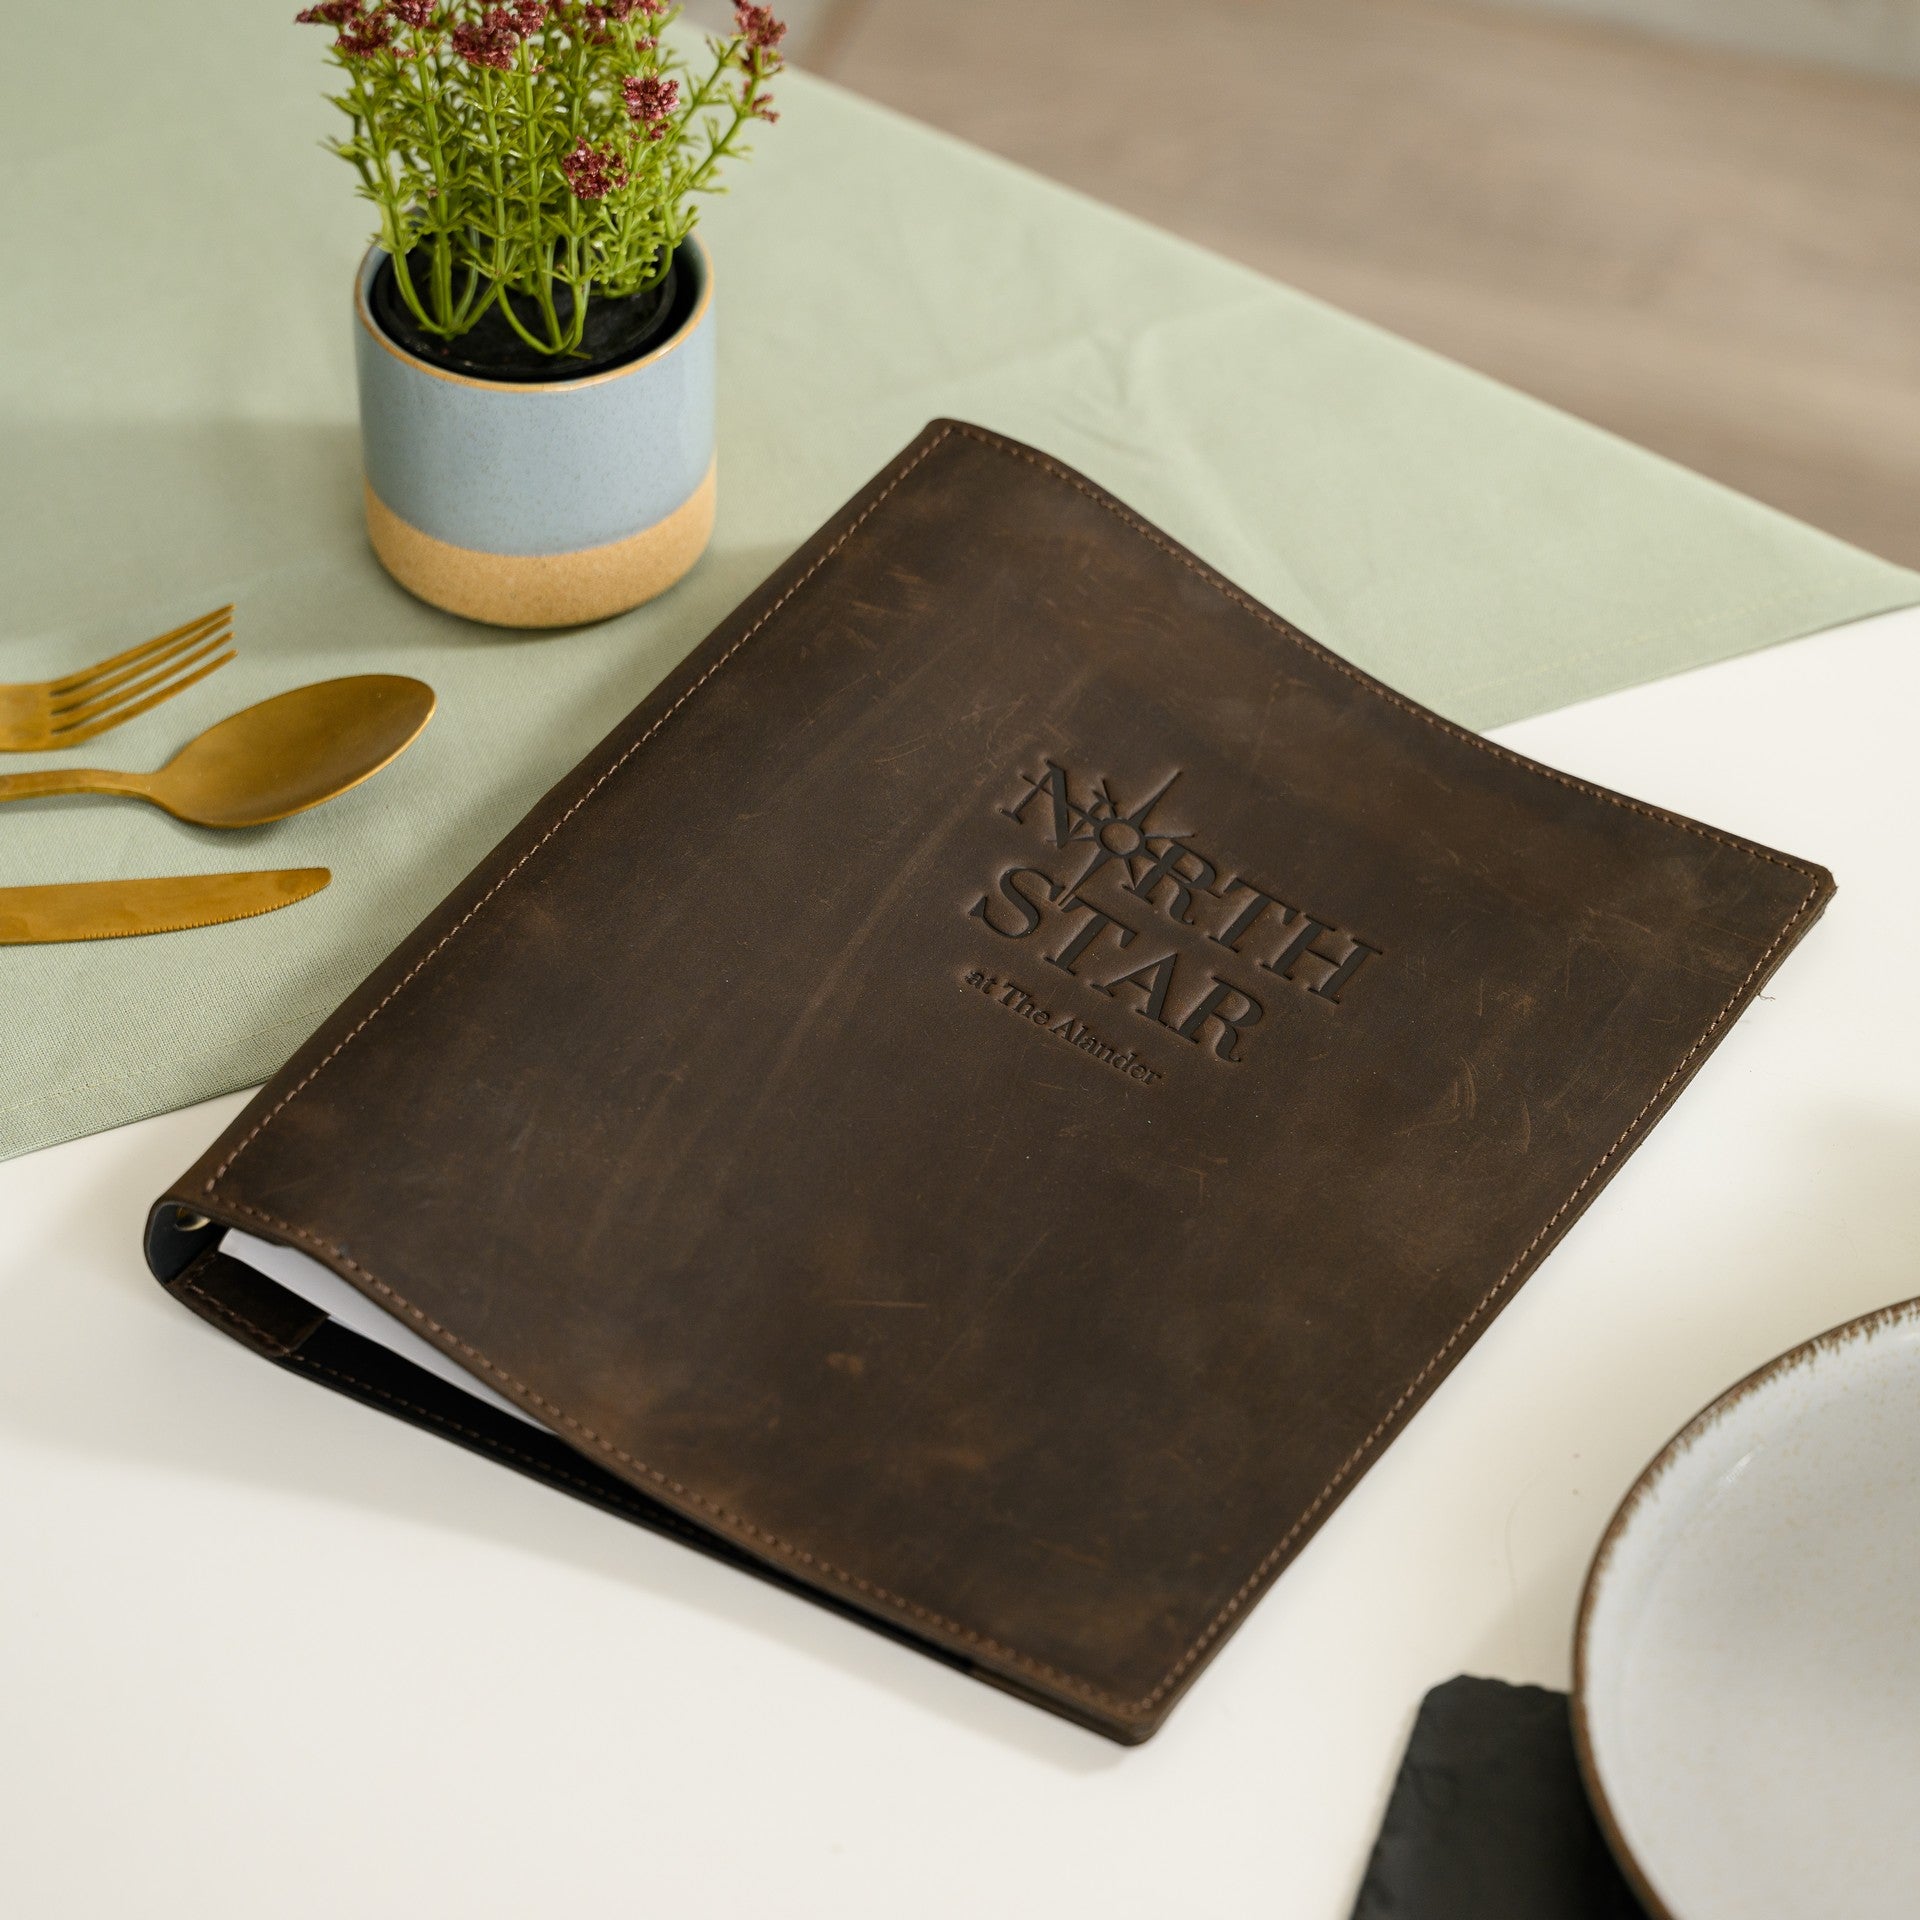 Impress your guests with a personalized menu cover, crafted to reflect your restaurant's unique style and personality.